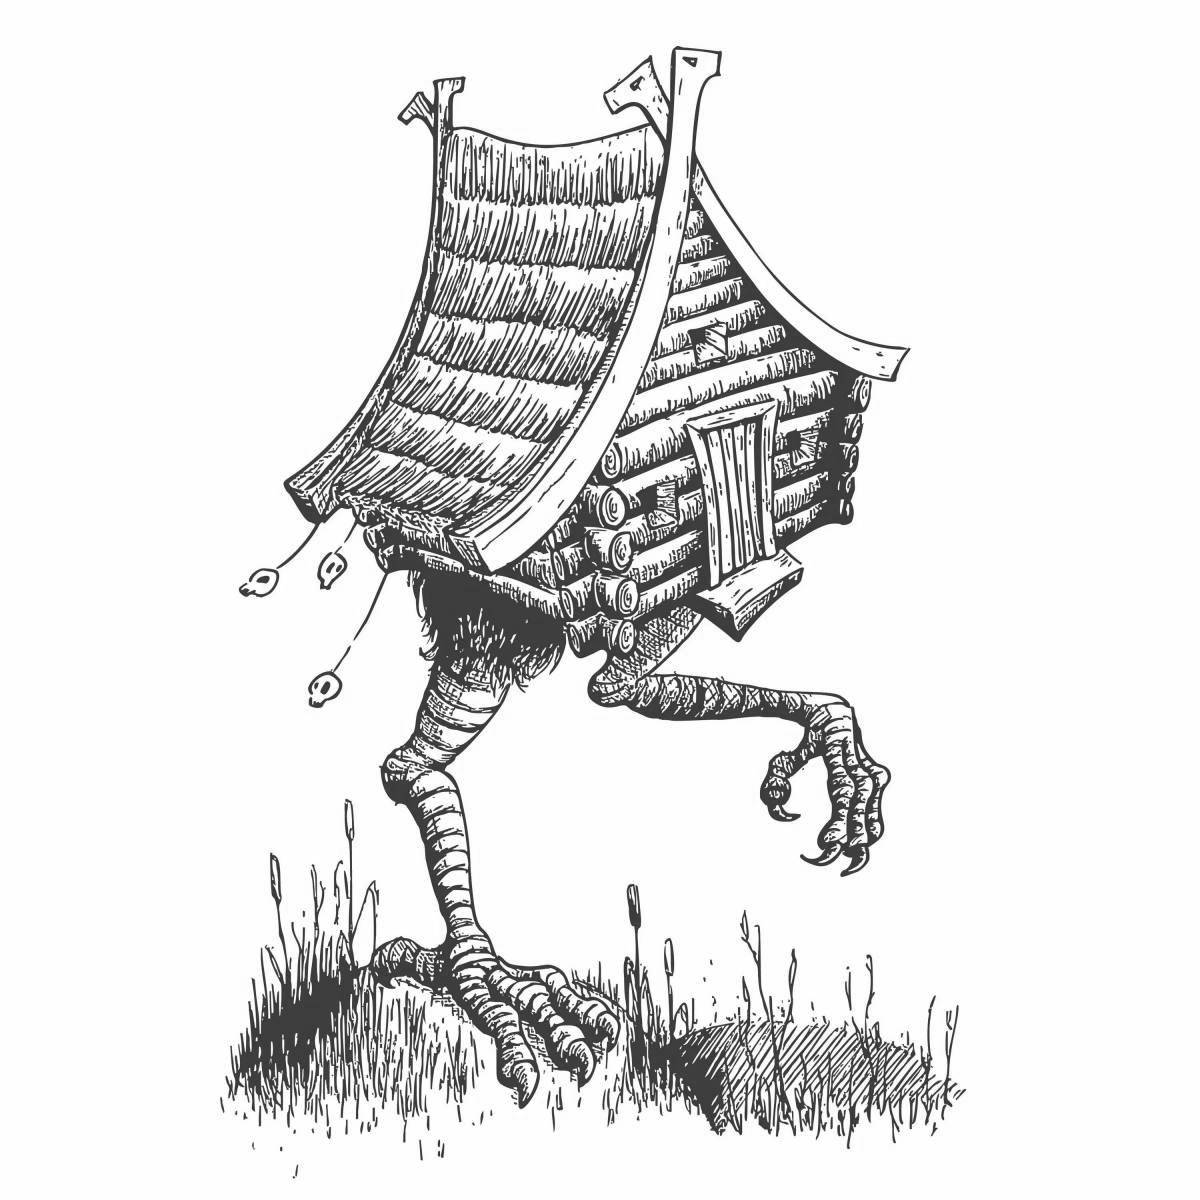 Coloring page of the charming baba yaga's house